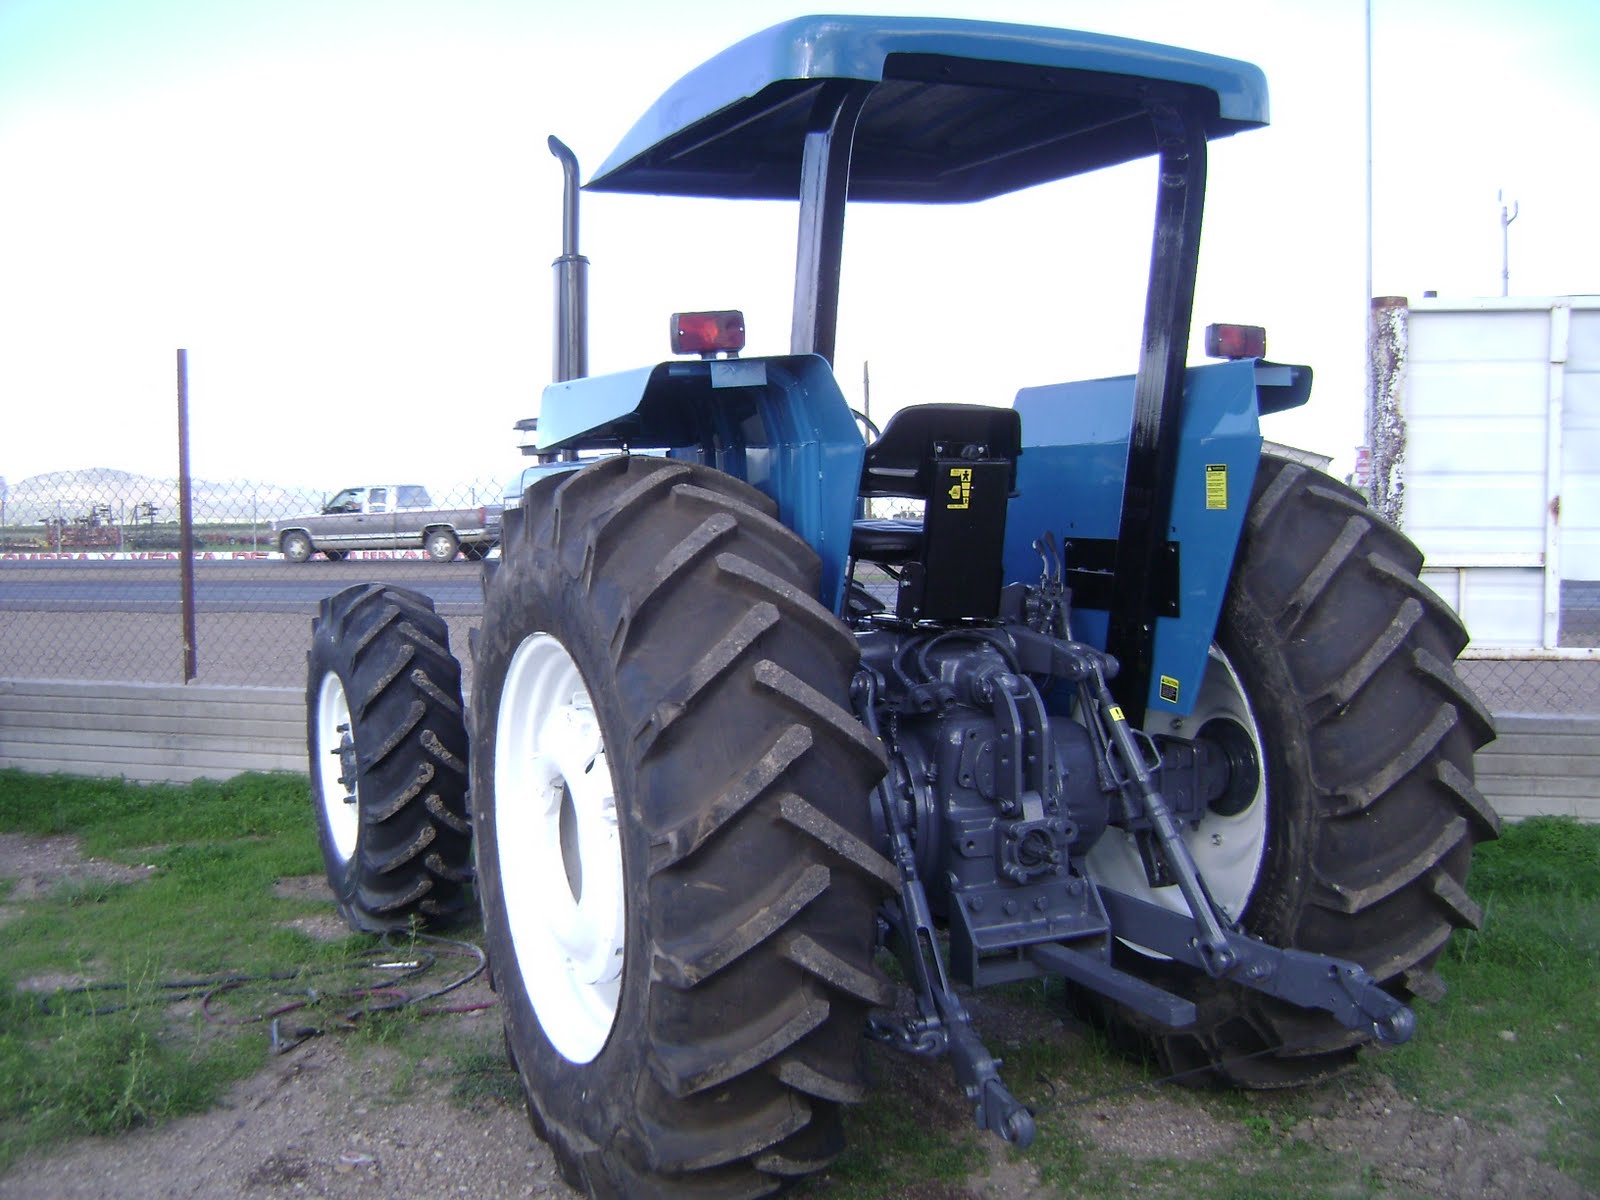 ... AGRICOLA INDUSTRIAL: Tractor Ford NH 8010 por $23000 dlls. (nak2400